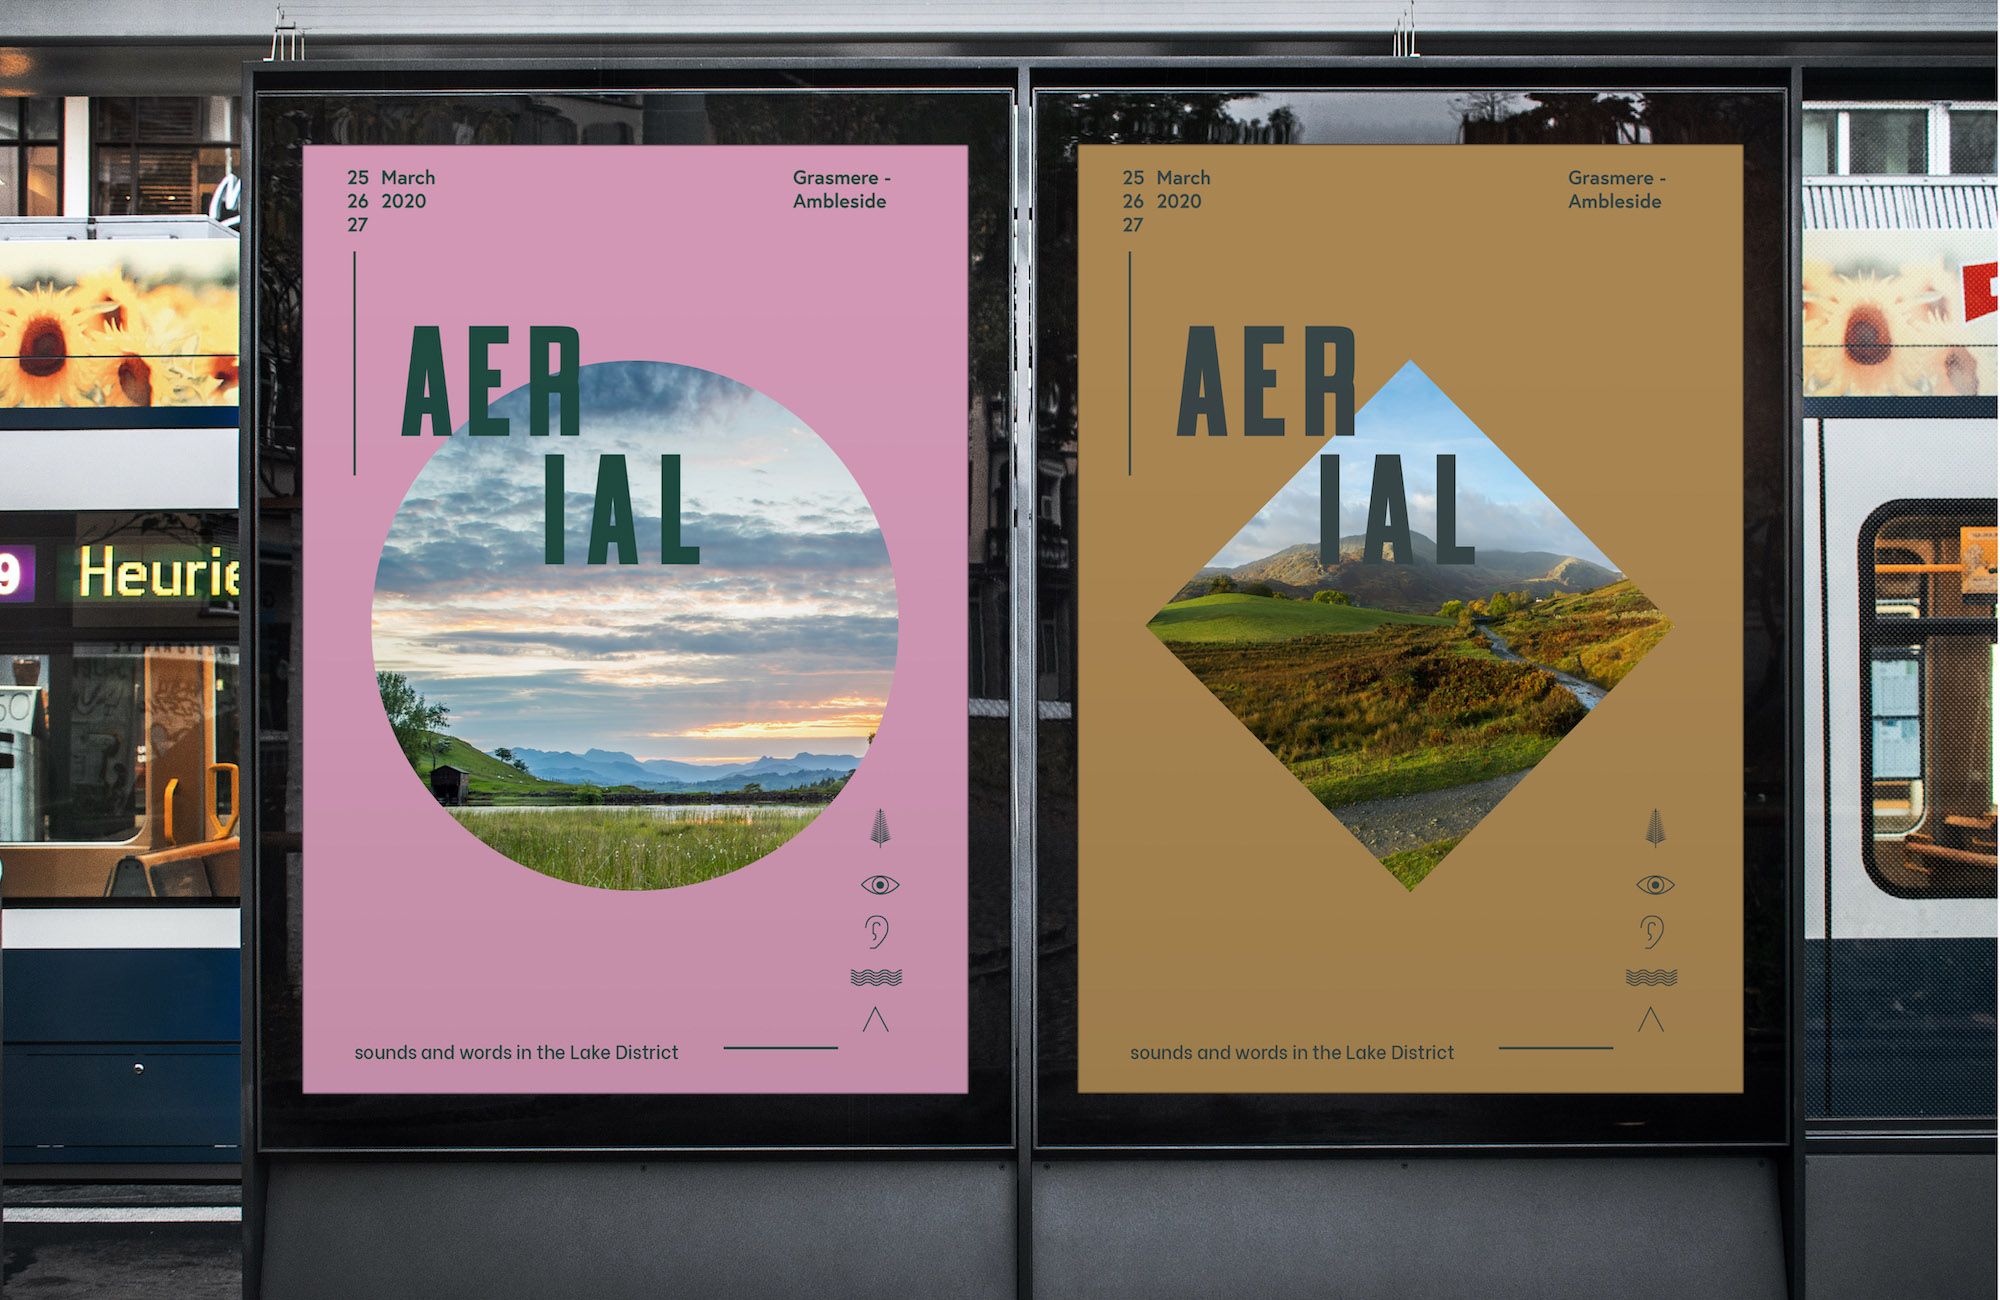 Launch of a new arts festival brand Aerial